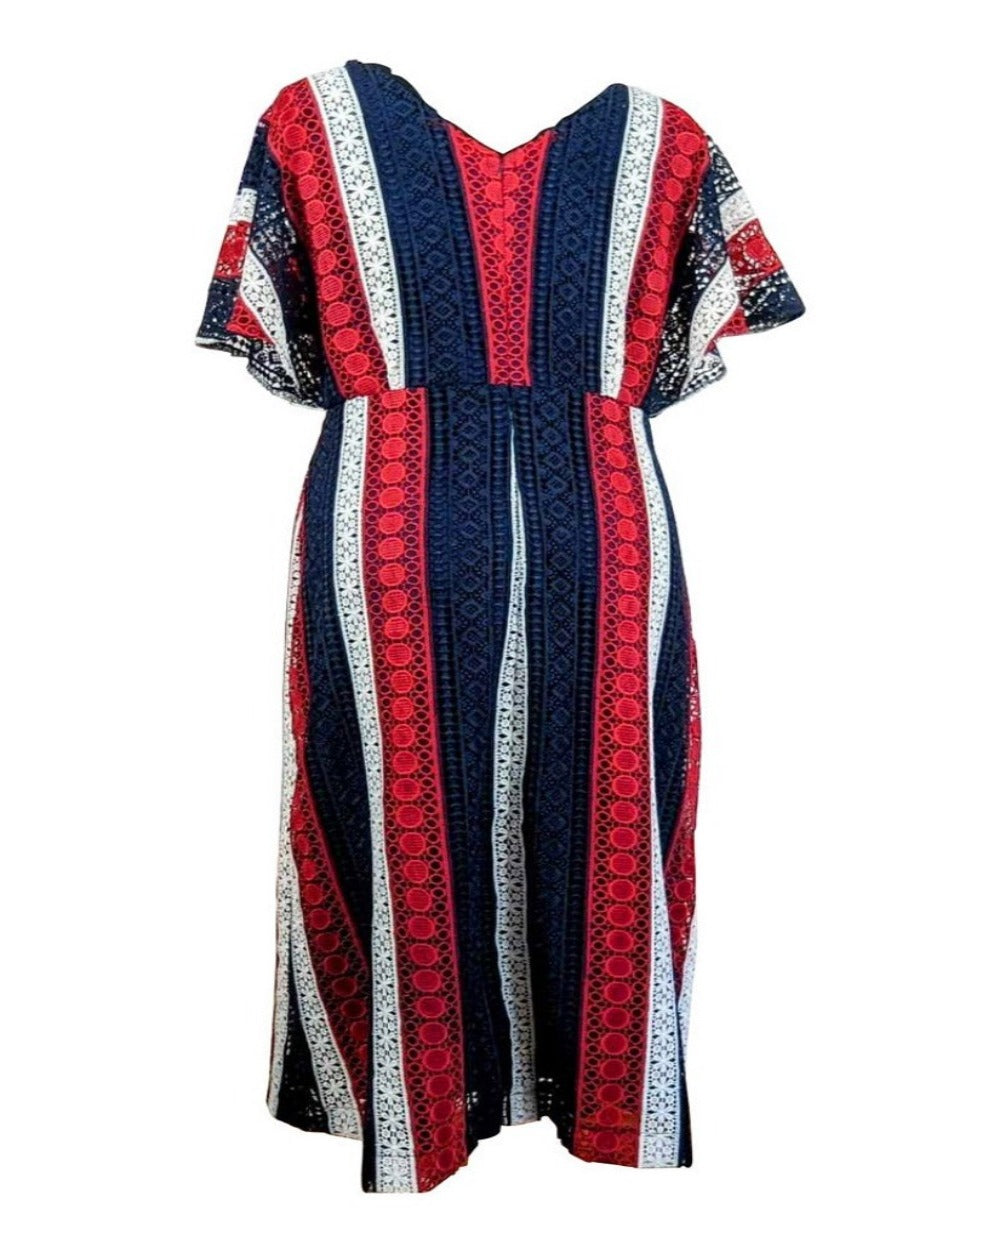 New Women's party dress, midi, navy, red & white, laced fabric, Perth Au,